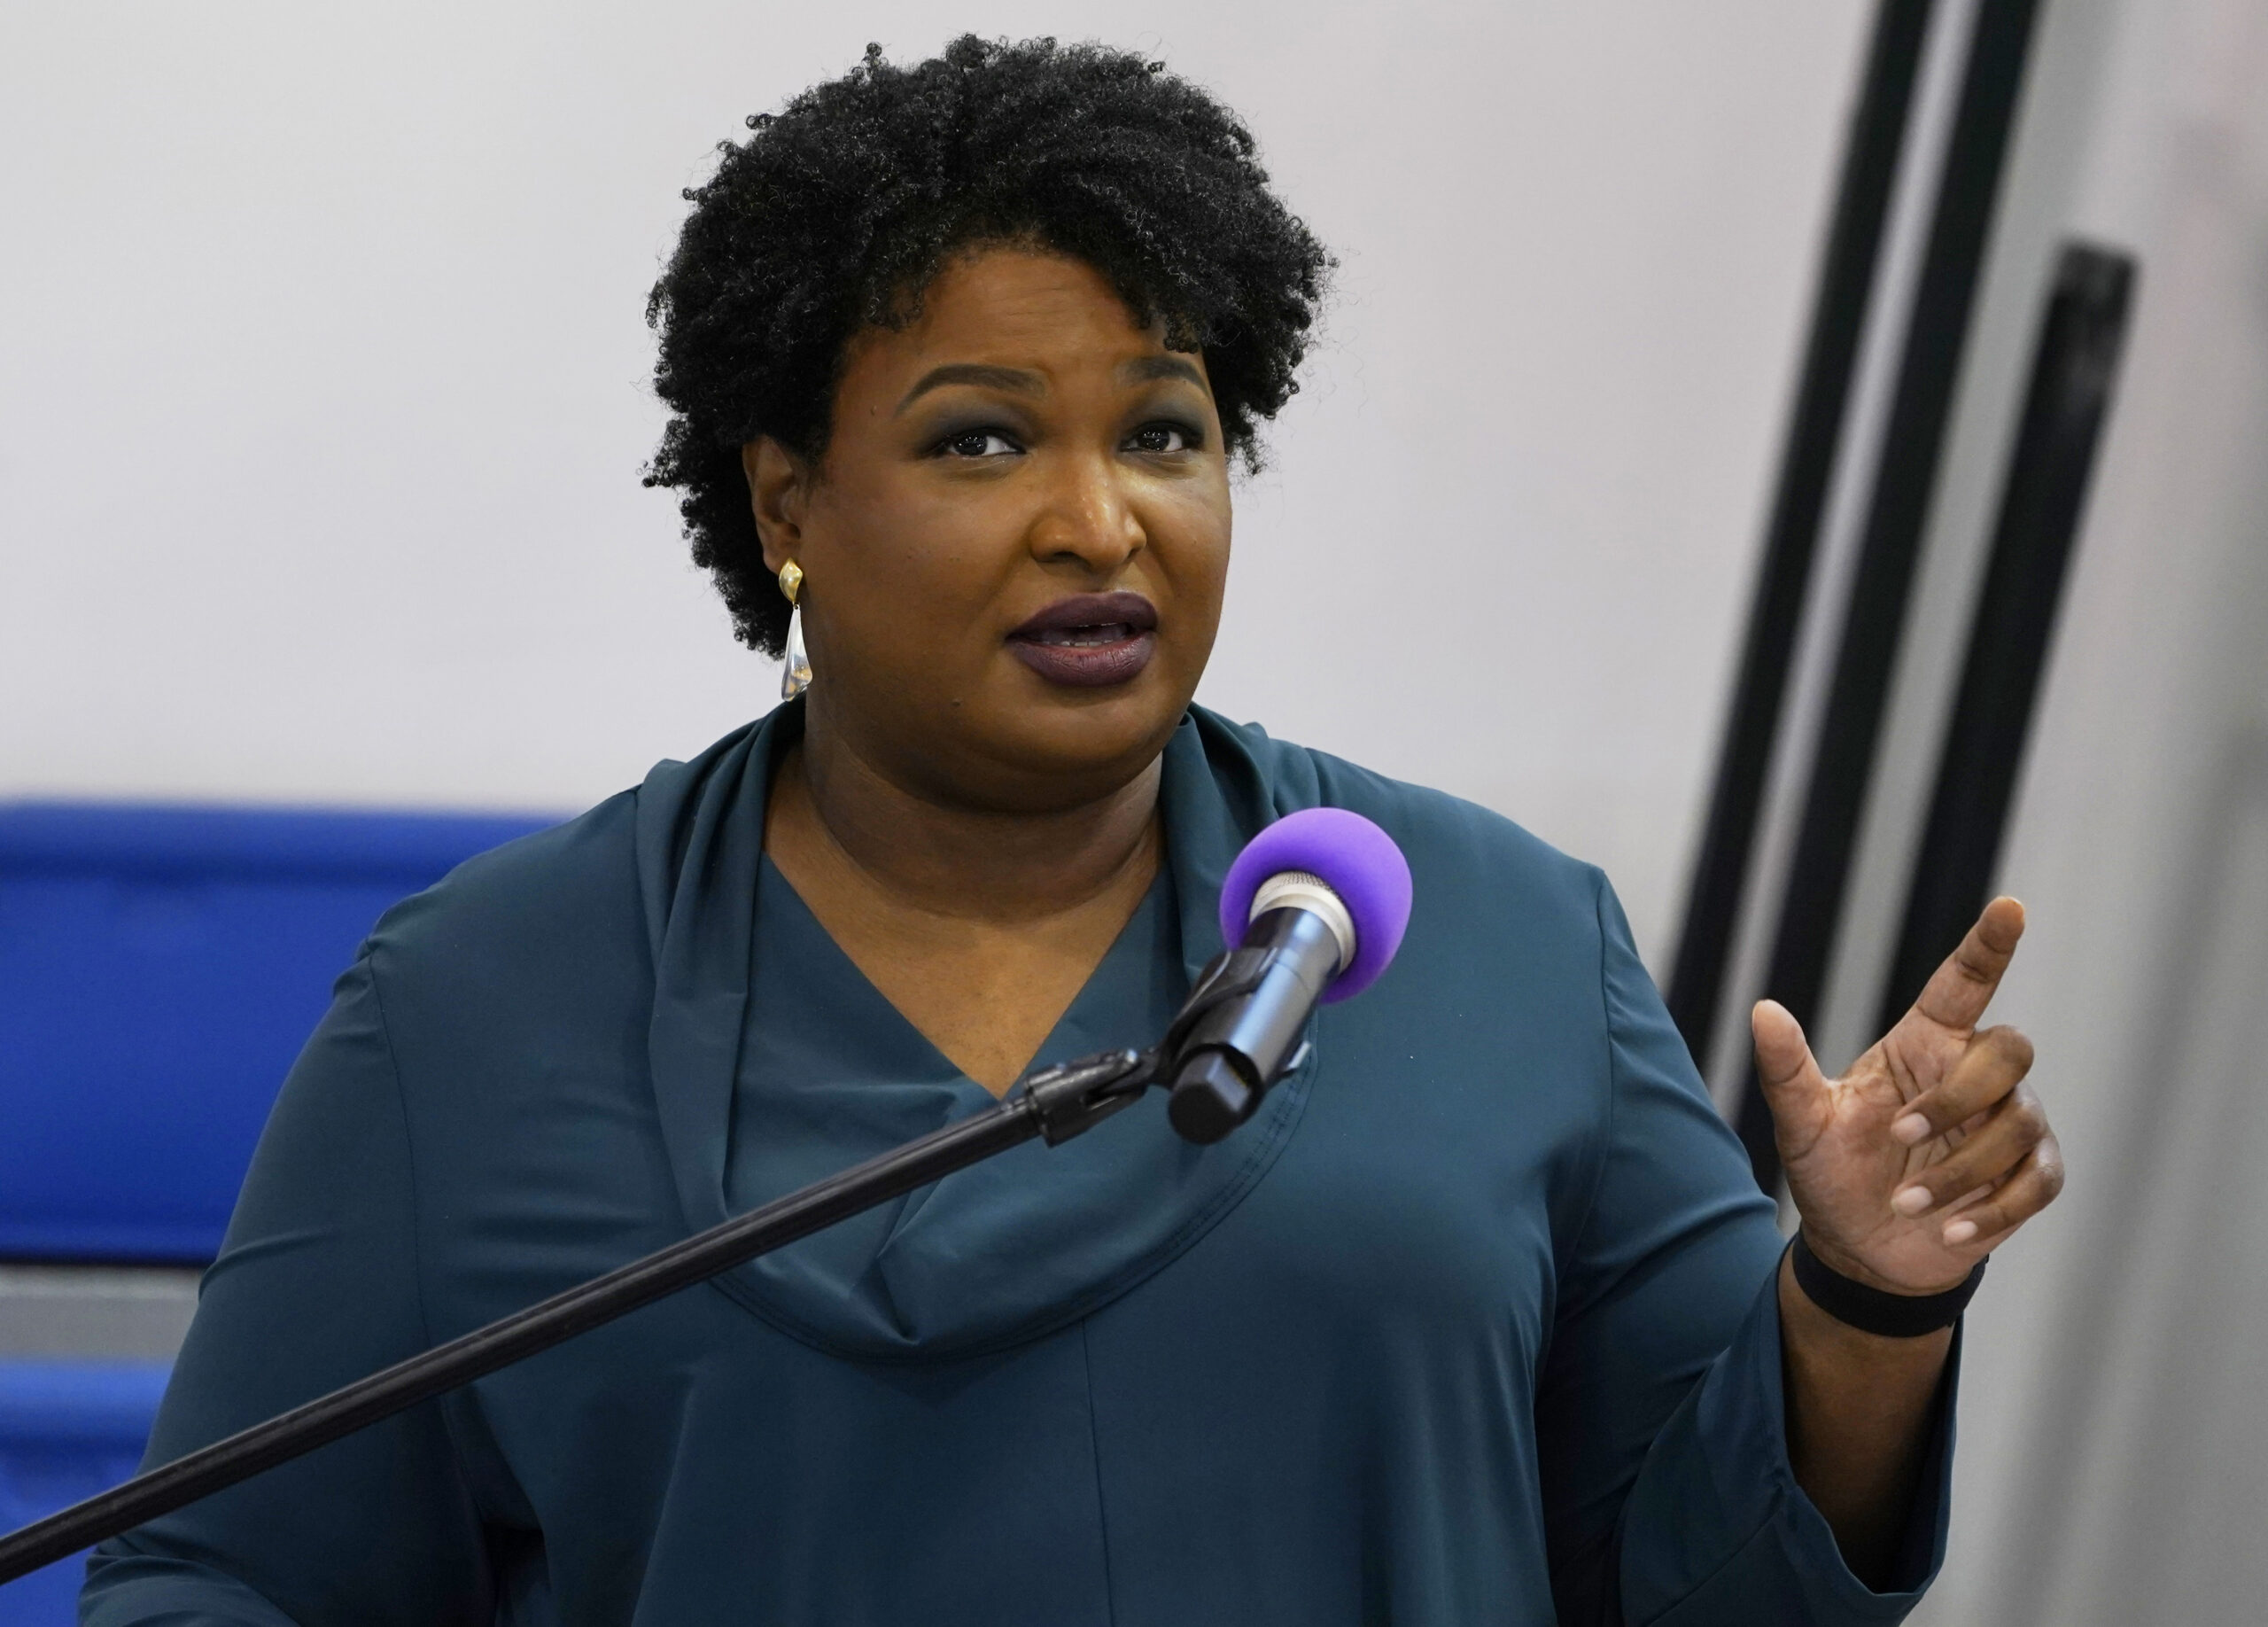 Stacey Abrams Group Donates $1.34M to Wipe out Medical Debts